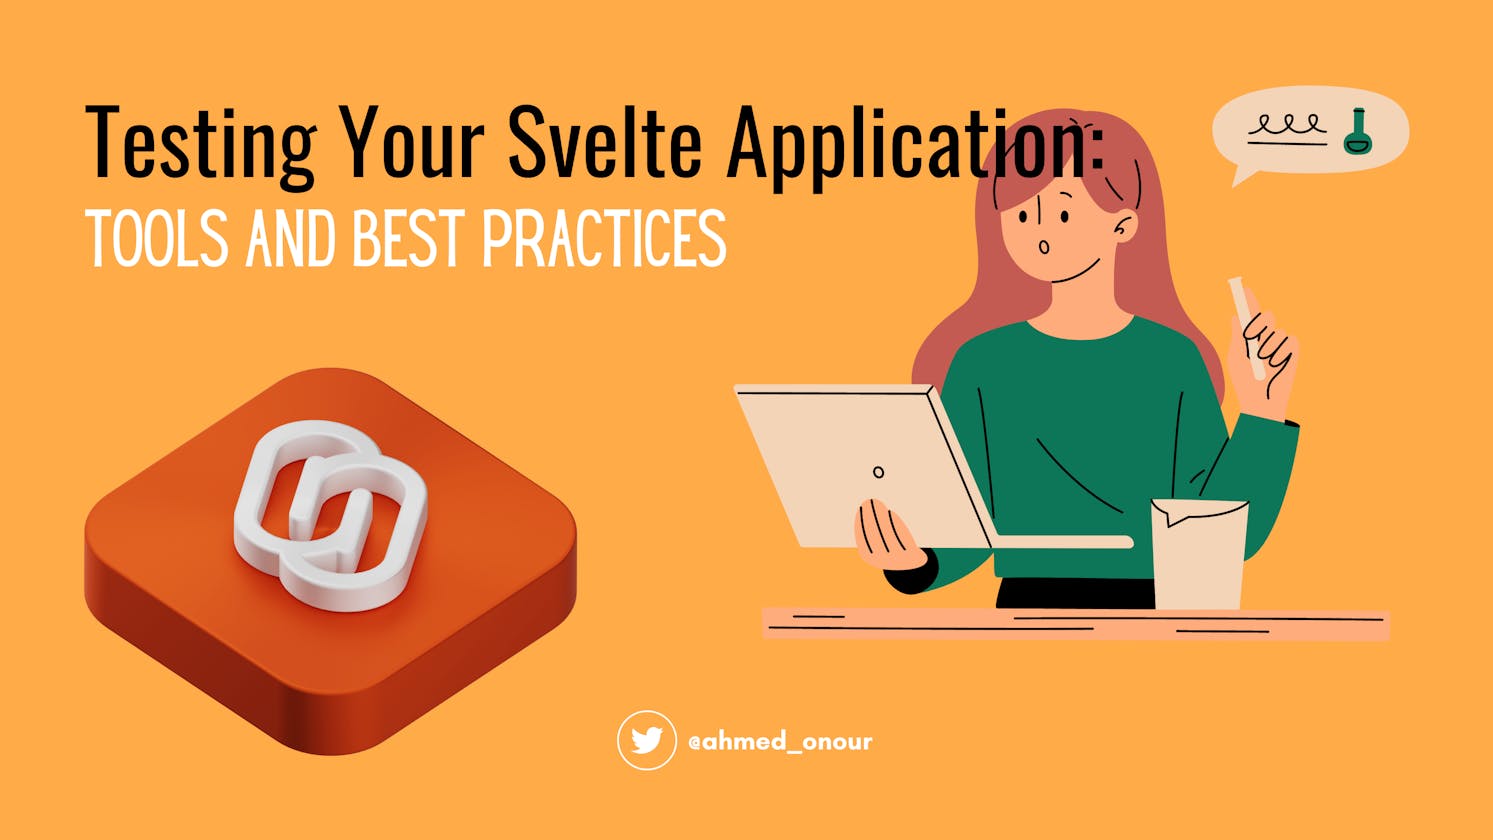 Testing Your Svelte Application: Tools and Best Practices